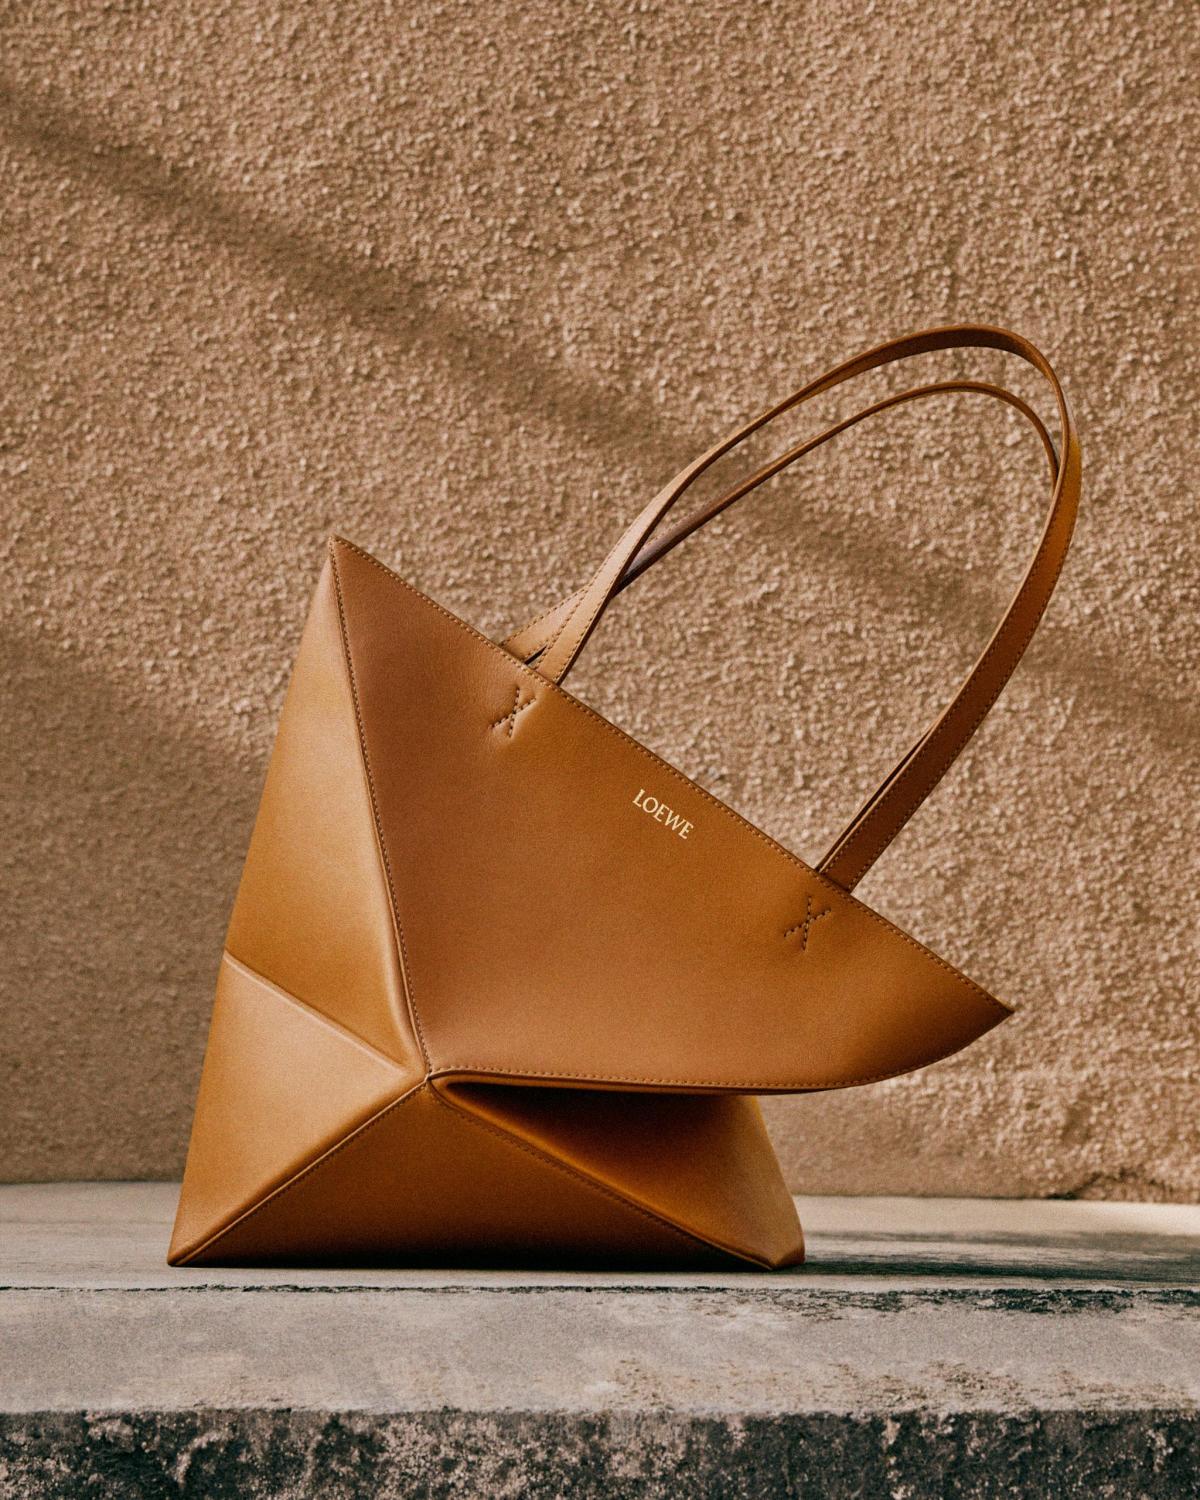 The Daily Bag: Loewe - The New York Times